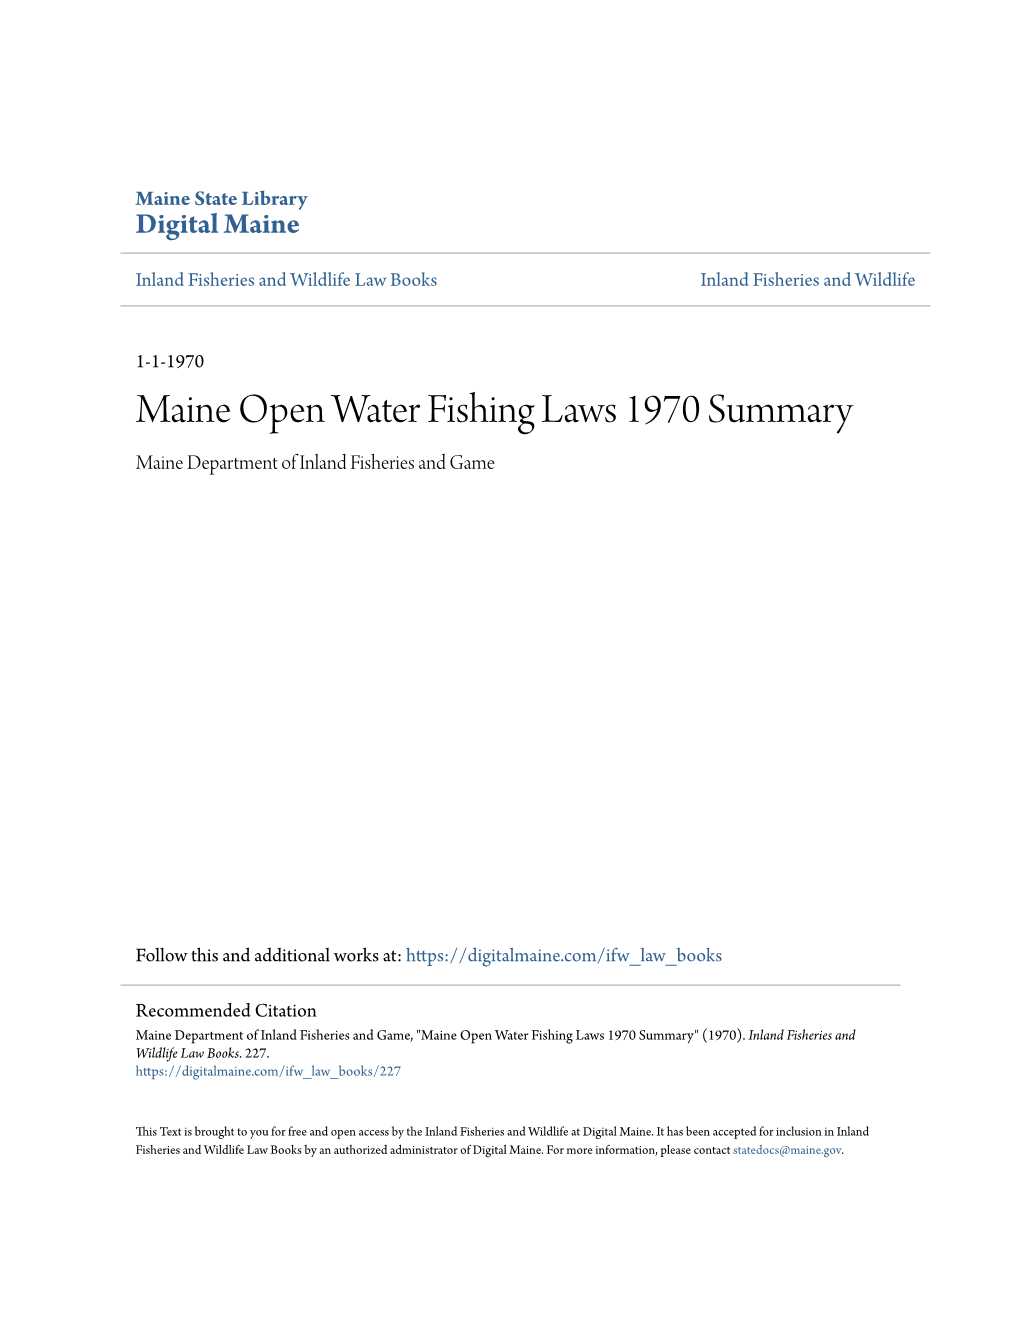 Maine Open Water Fishing Laws 1970 Summary Maine Department of Inland Fisheries and Game